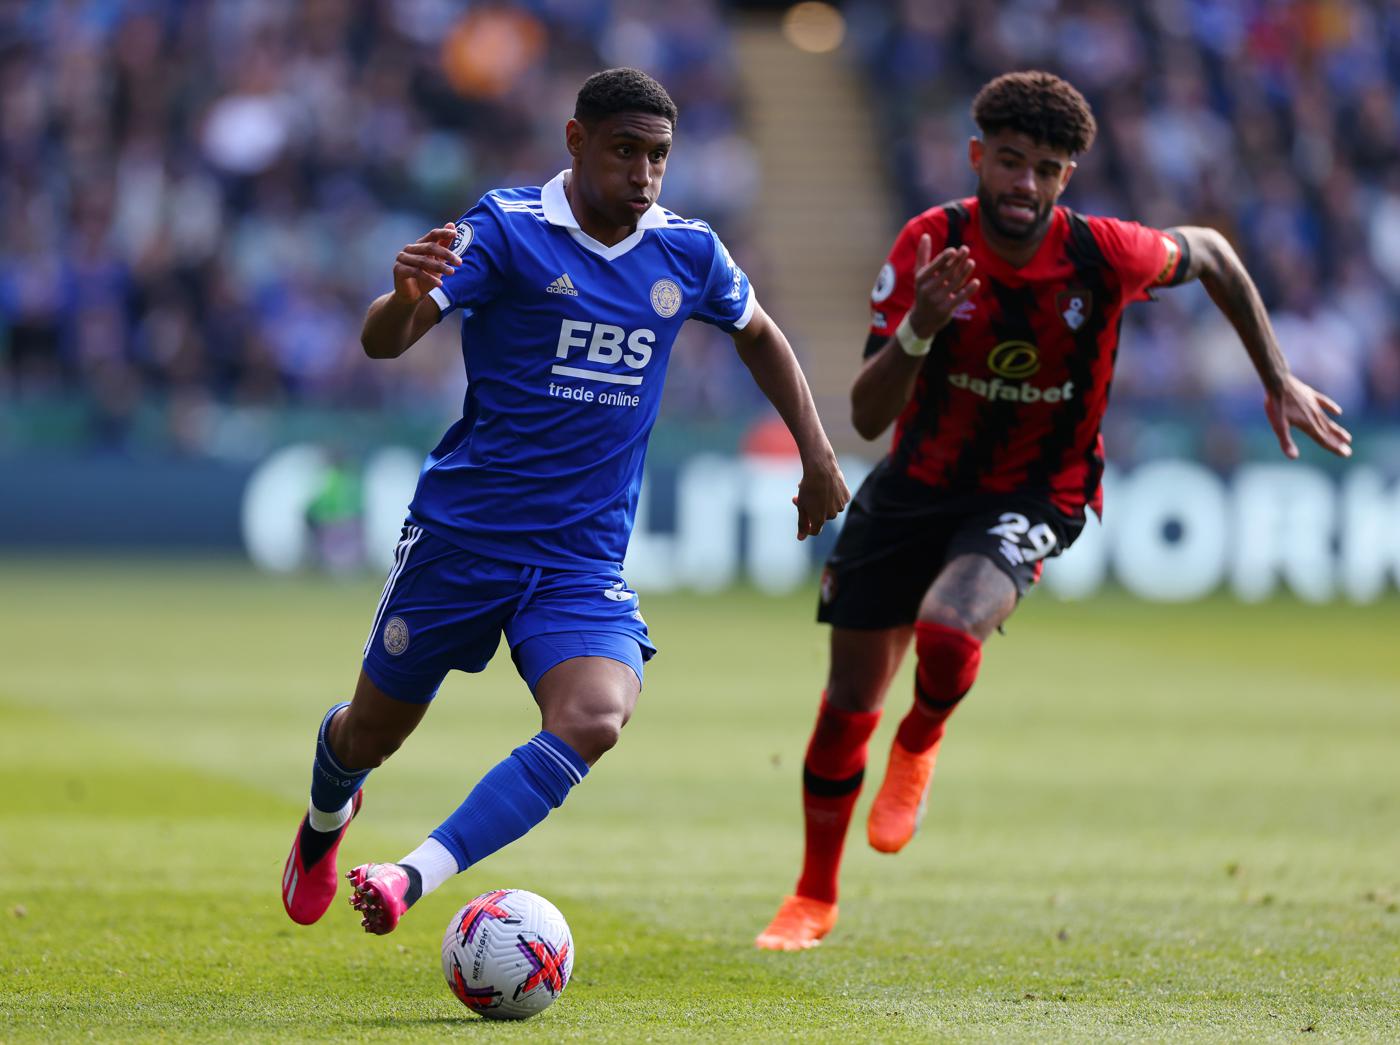 Leicester - Bournemouth - 0:1. English Championship, round 30. Match Review, Statistics